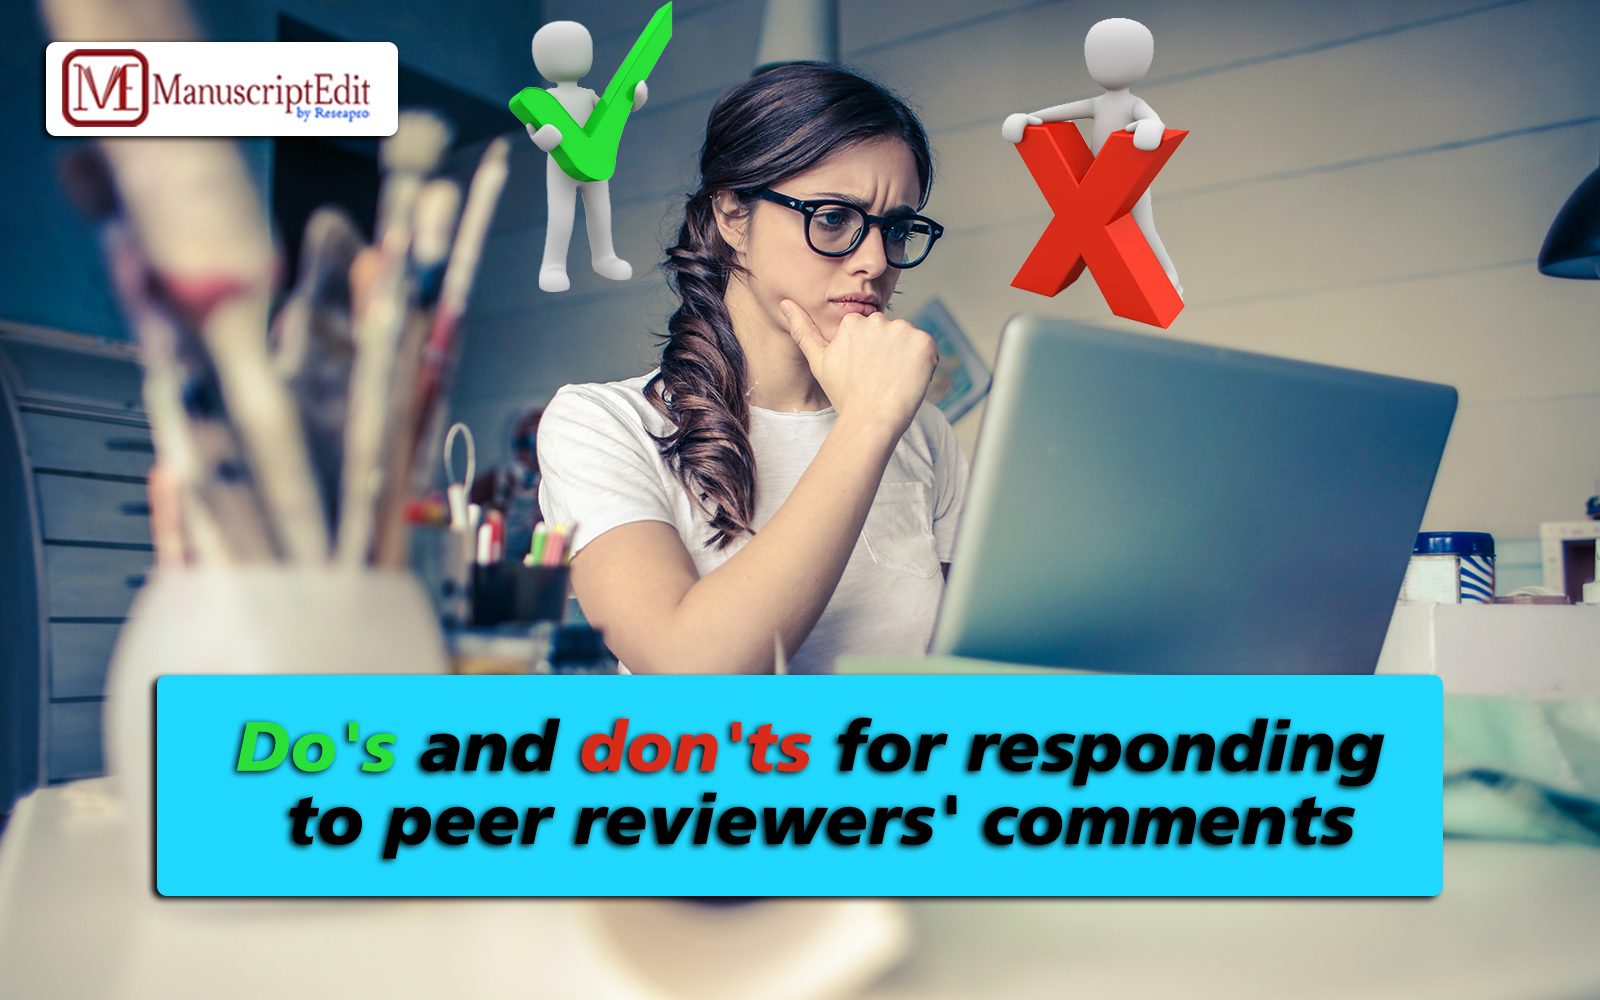 Do’s and don’ts for responding to peer reviewers’ comments